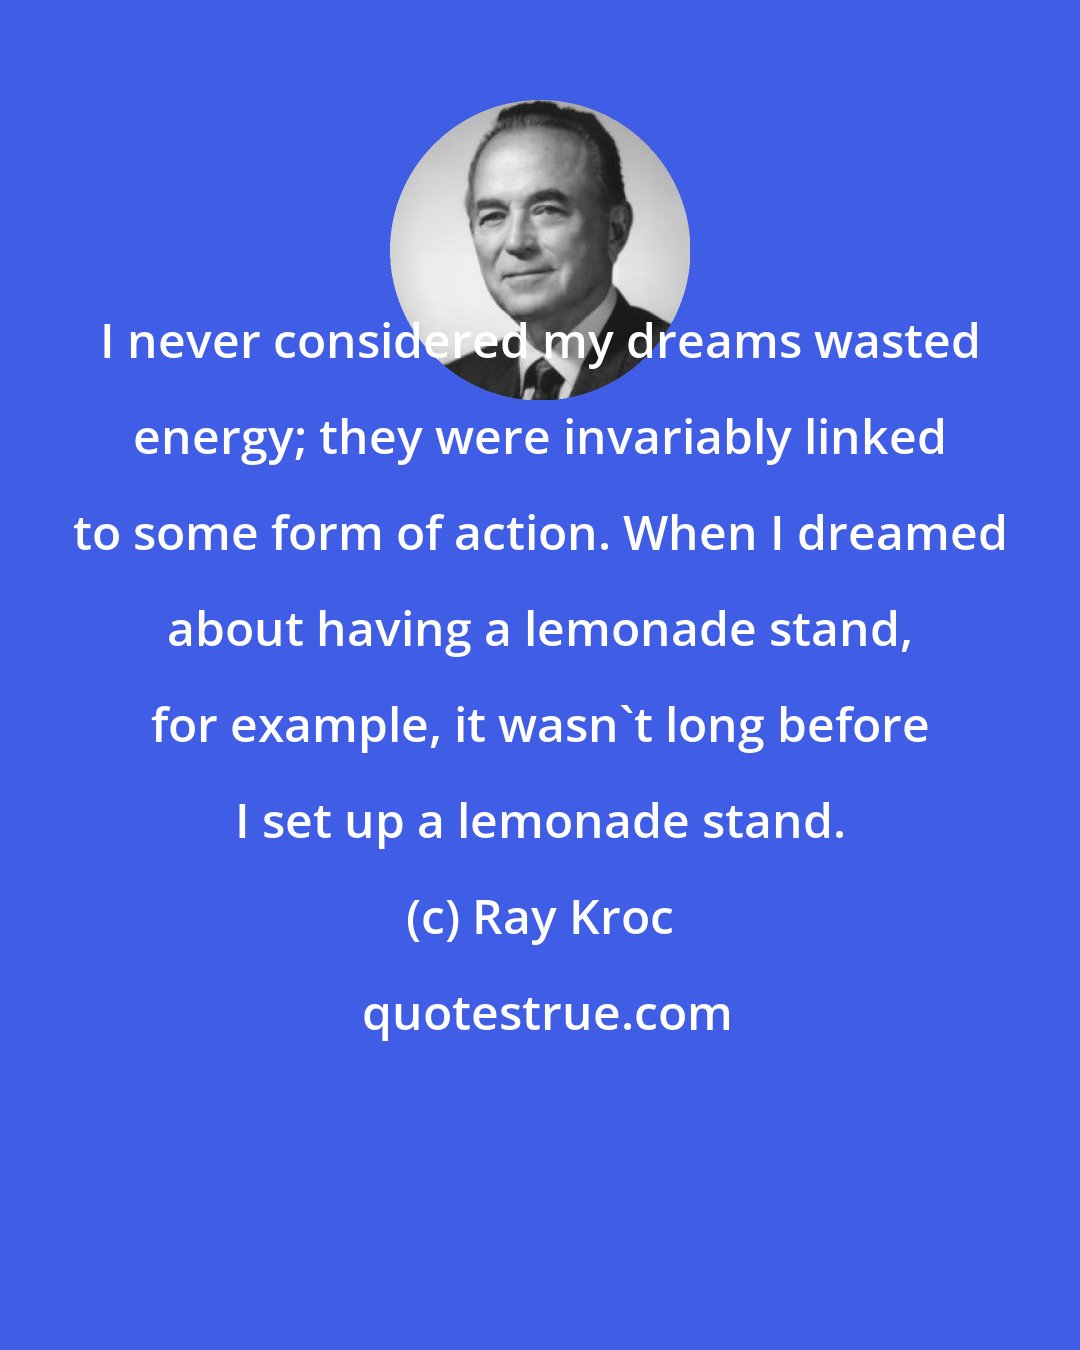 Ray Kroc: I never considered my dreams wasted energy; they were invariably linked to some form of action. When I dreamed about having a lemonade stand, for example, it wasn't long before I set up a lemonade stand.